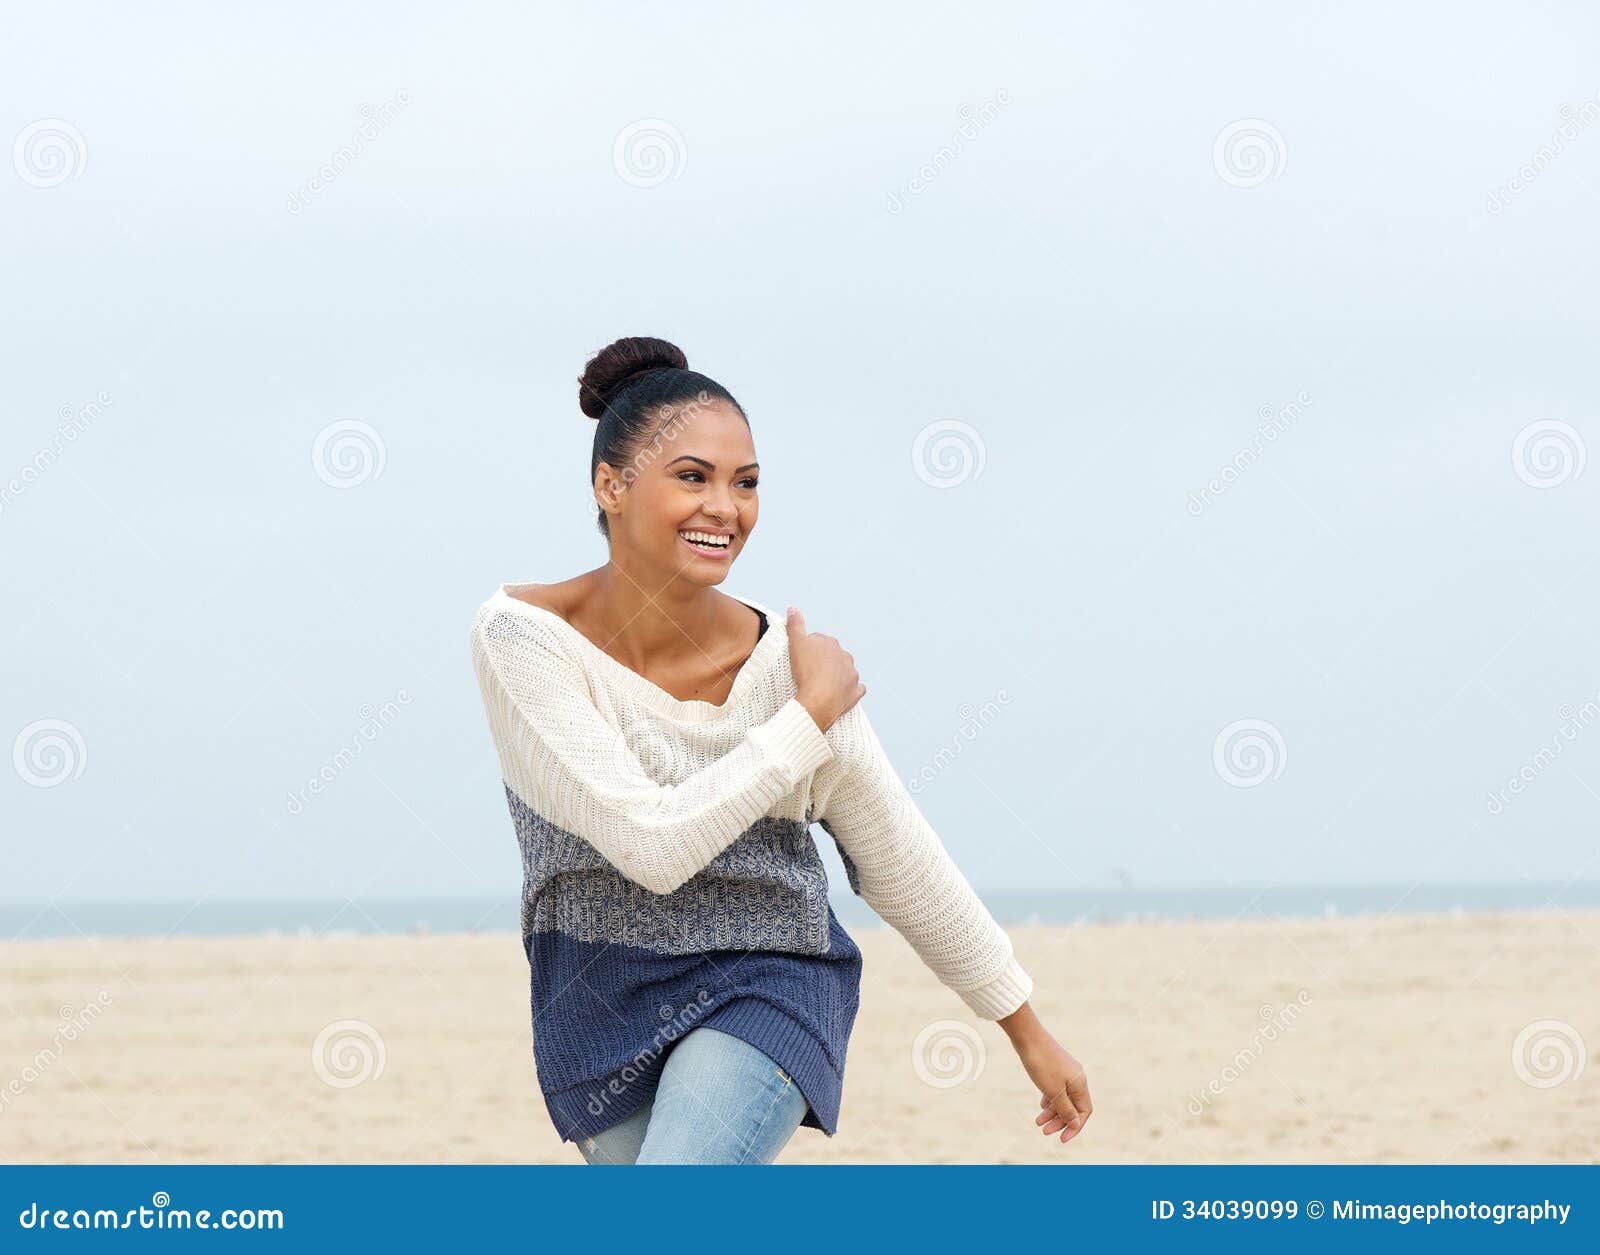 Portrait Of A Cheerful Carefree Young Woman Walking On The Beach ...